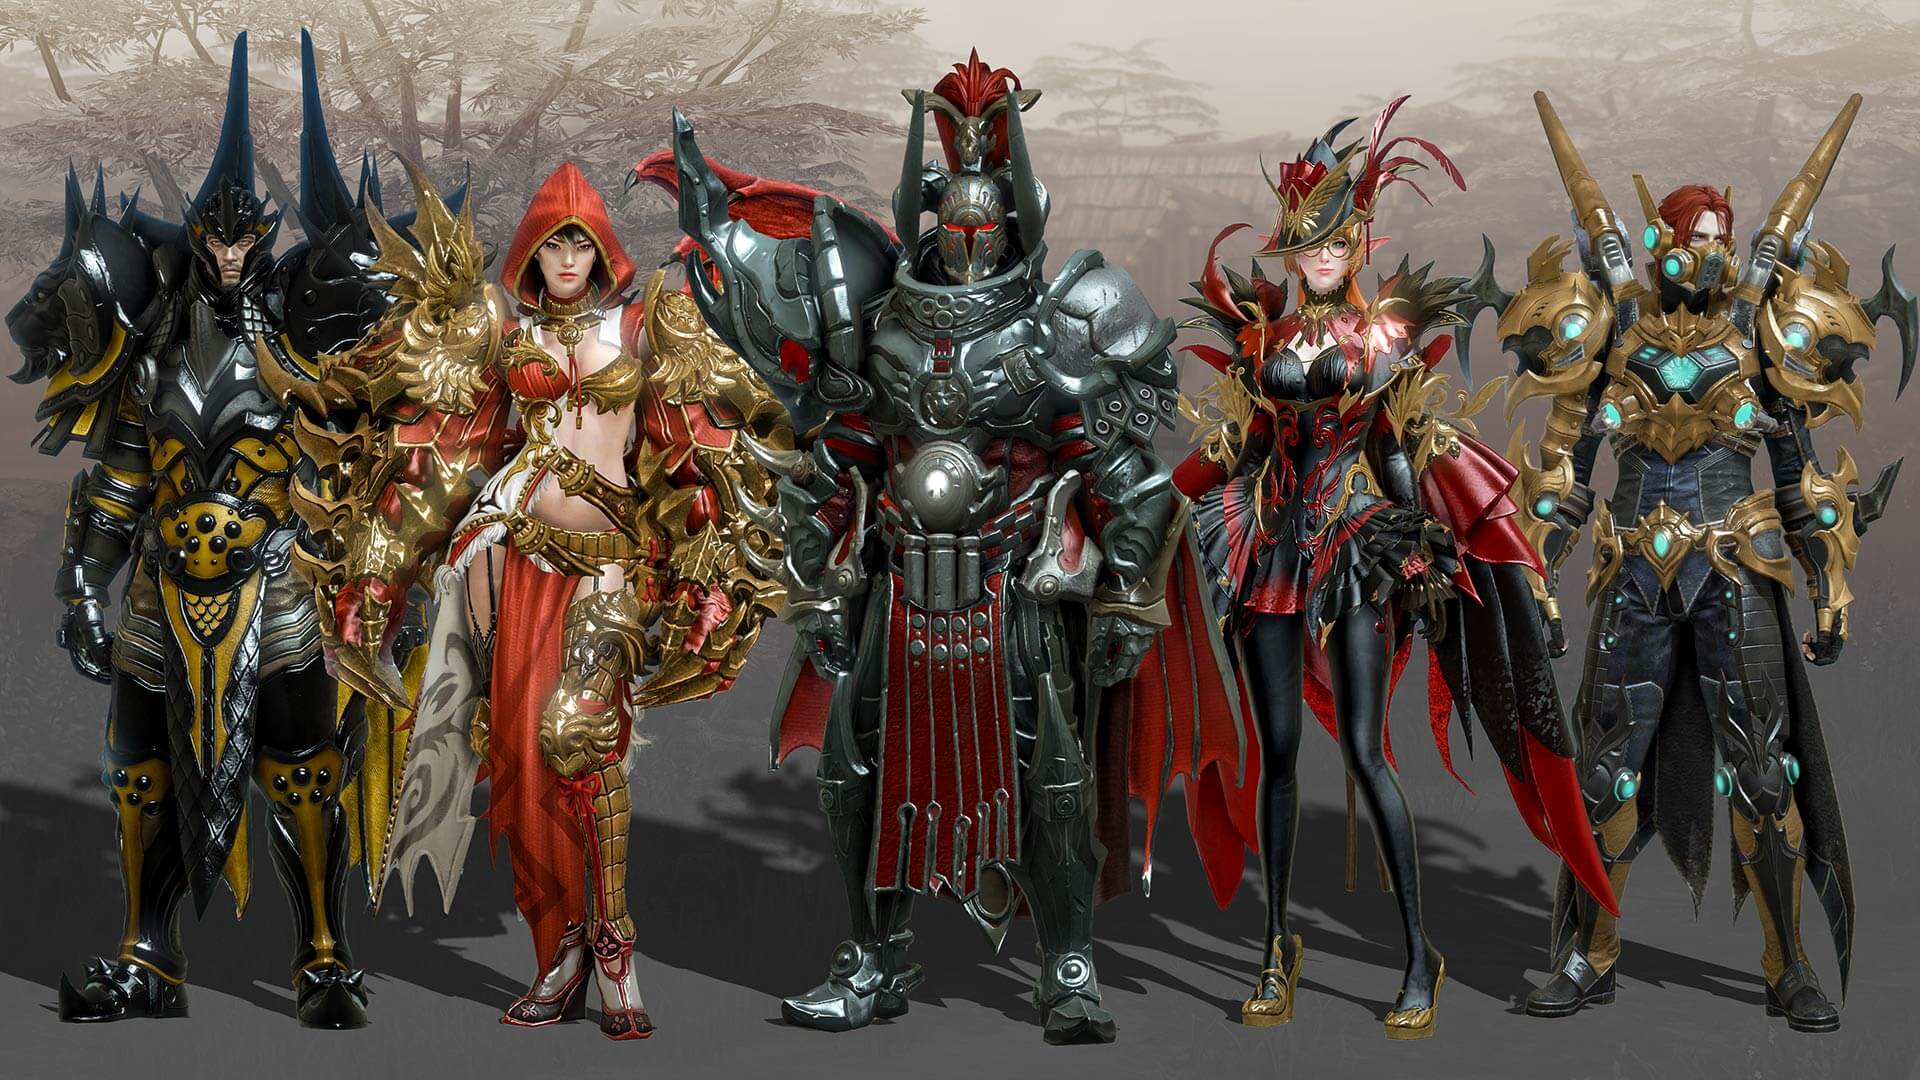 The Dawn Collection armor skins in Lost Ark